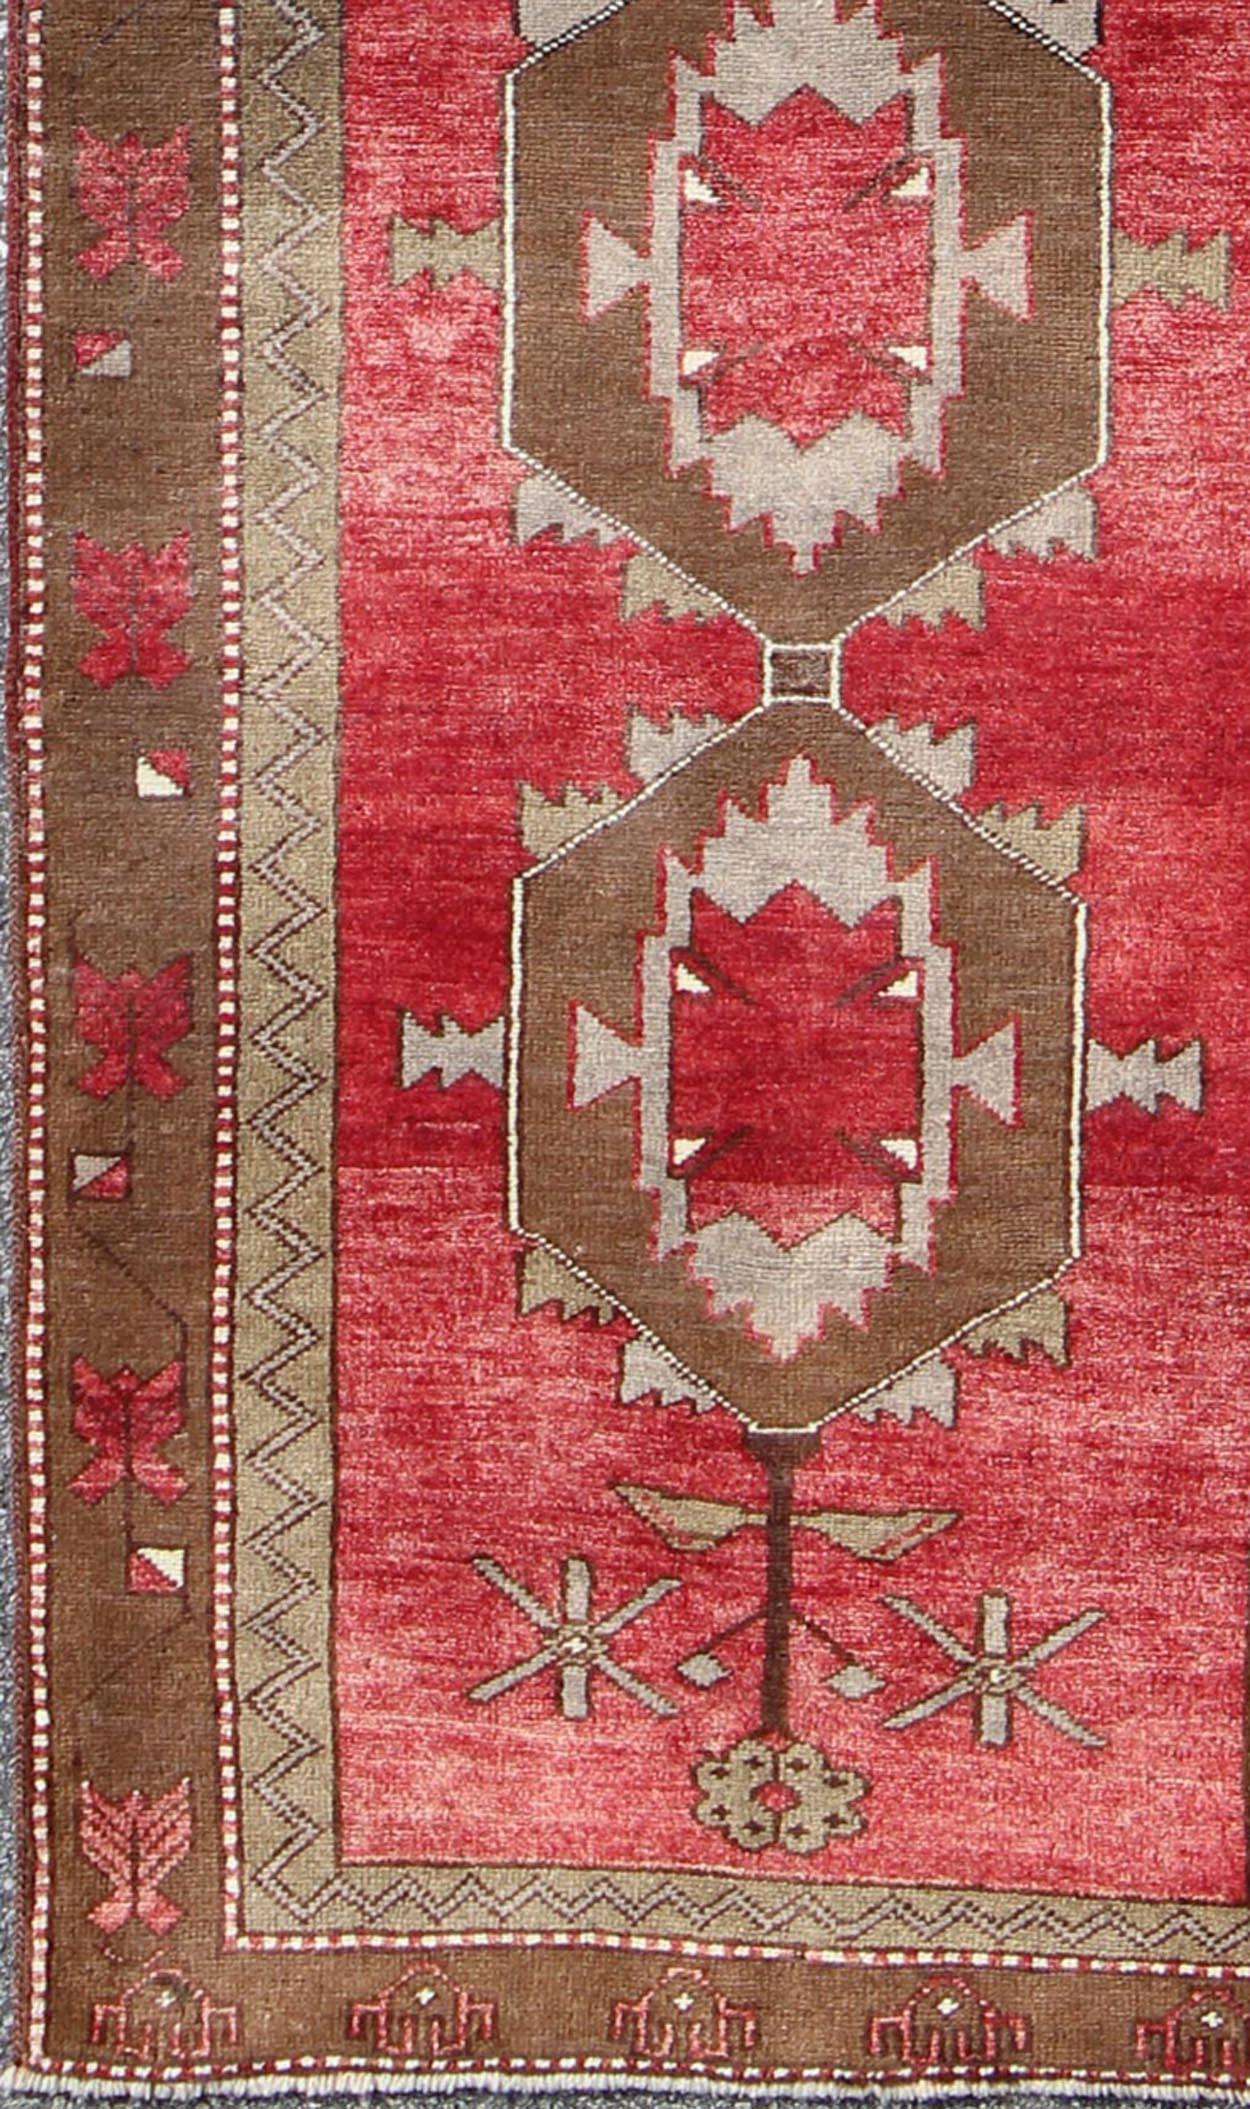 Striking Oushak runner Turkish vintage with red and brown layered medallions, rug en-123932, country of origin / type: Turkey / Oushak, circa 1940.

This vintage Turkish Oushak runner (circa 1940) features a unique blend of colors and an intricately